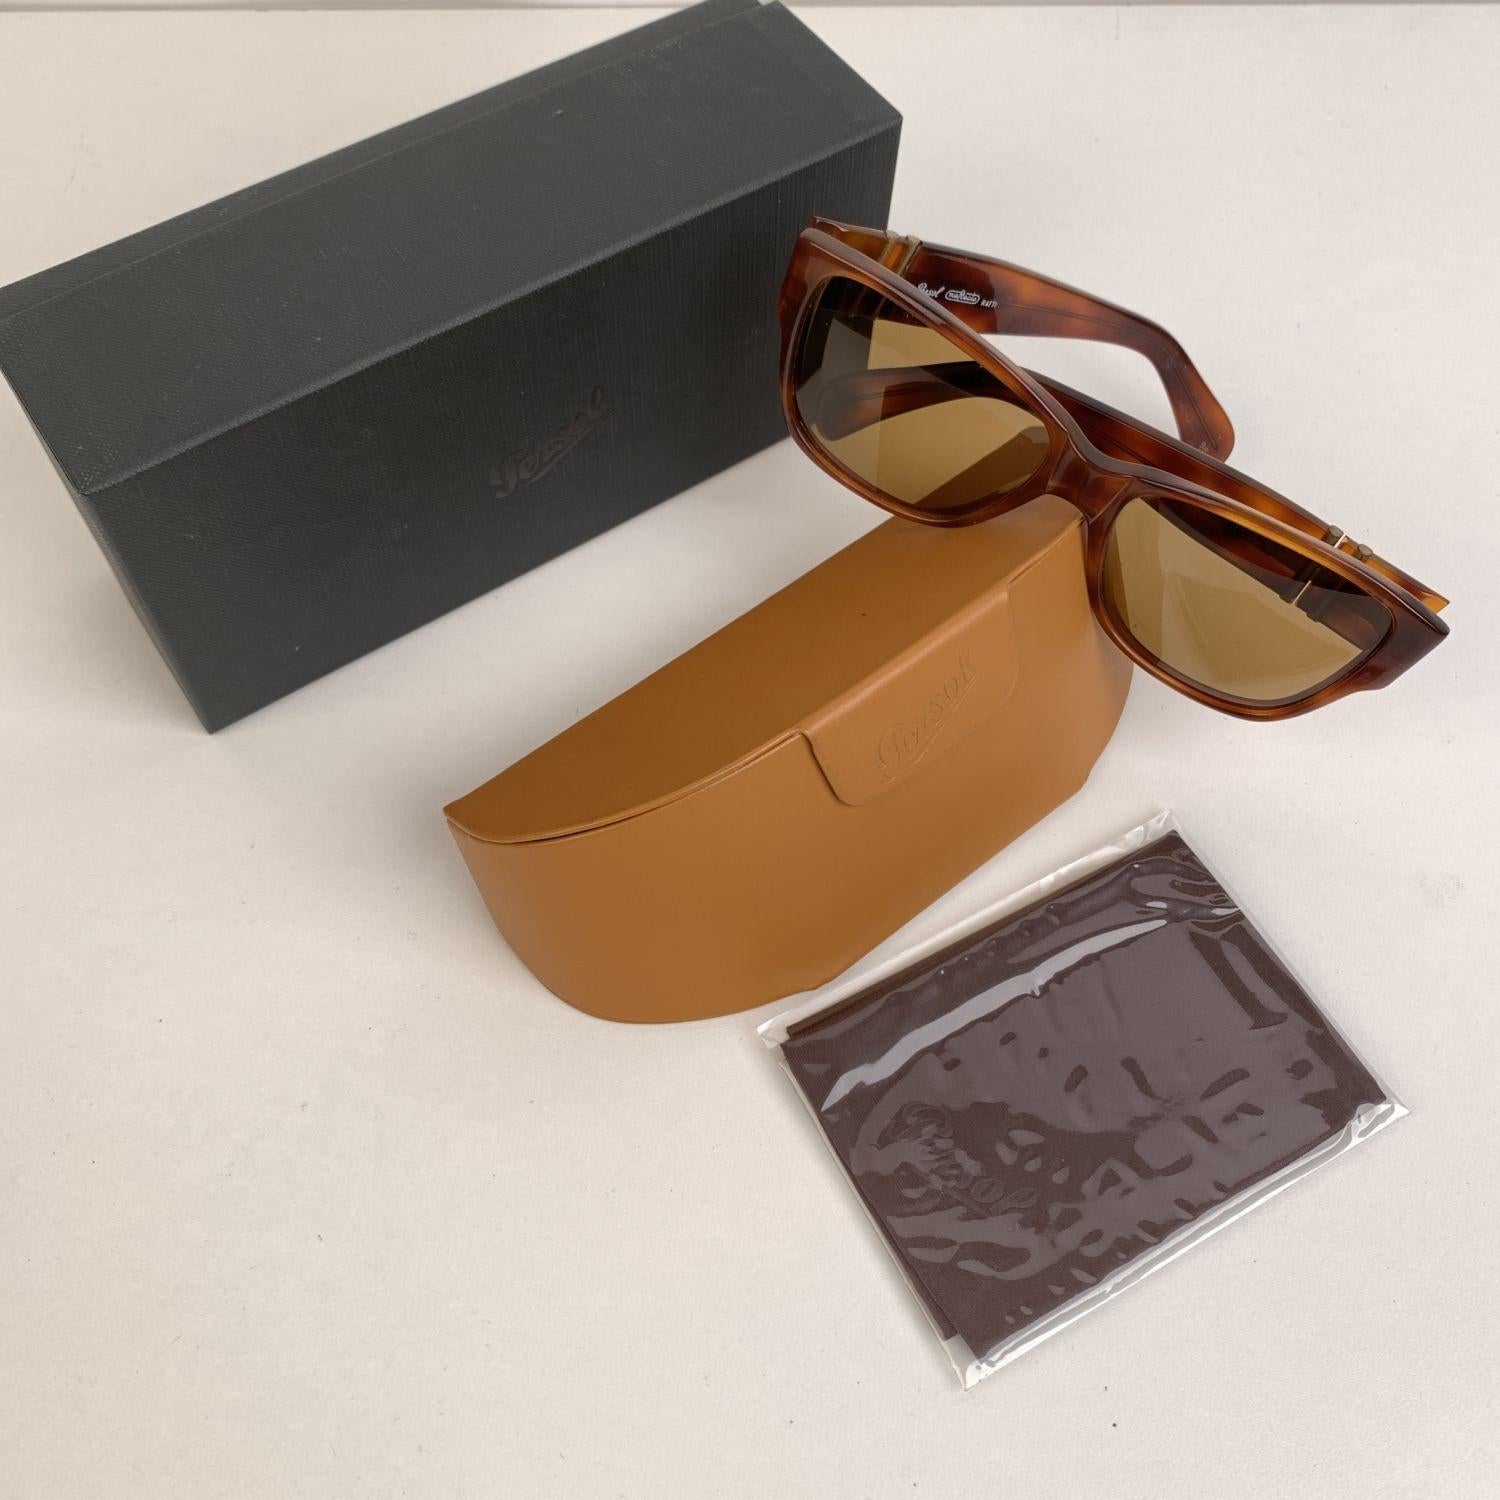 Legendary Model 69218 - Miami. Worn by famous Hollywood actors (Don Johnson - Miami Vice). Original Vintage. Persol original lenses, with logo etched or left lens, top right corner (see pictures).



Details

MATERIAL: Acetate

COLOR: Brown

MODEL: